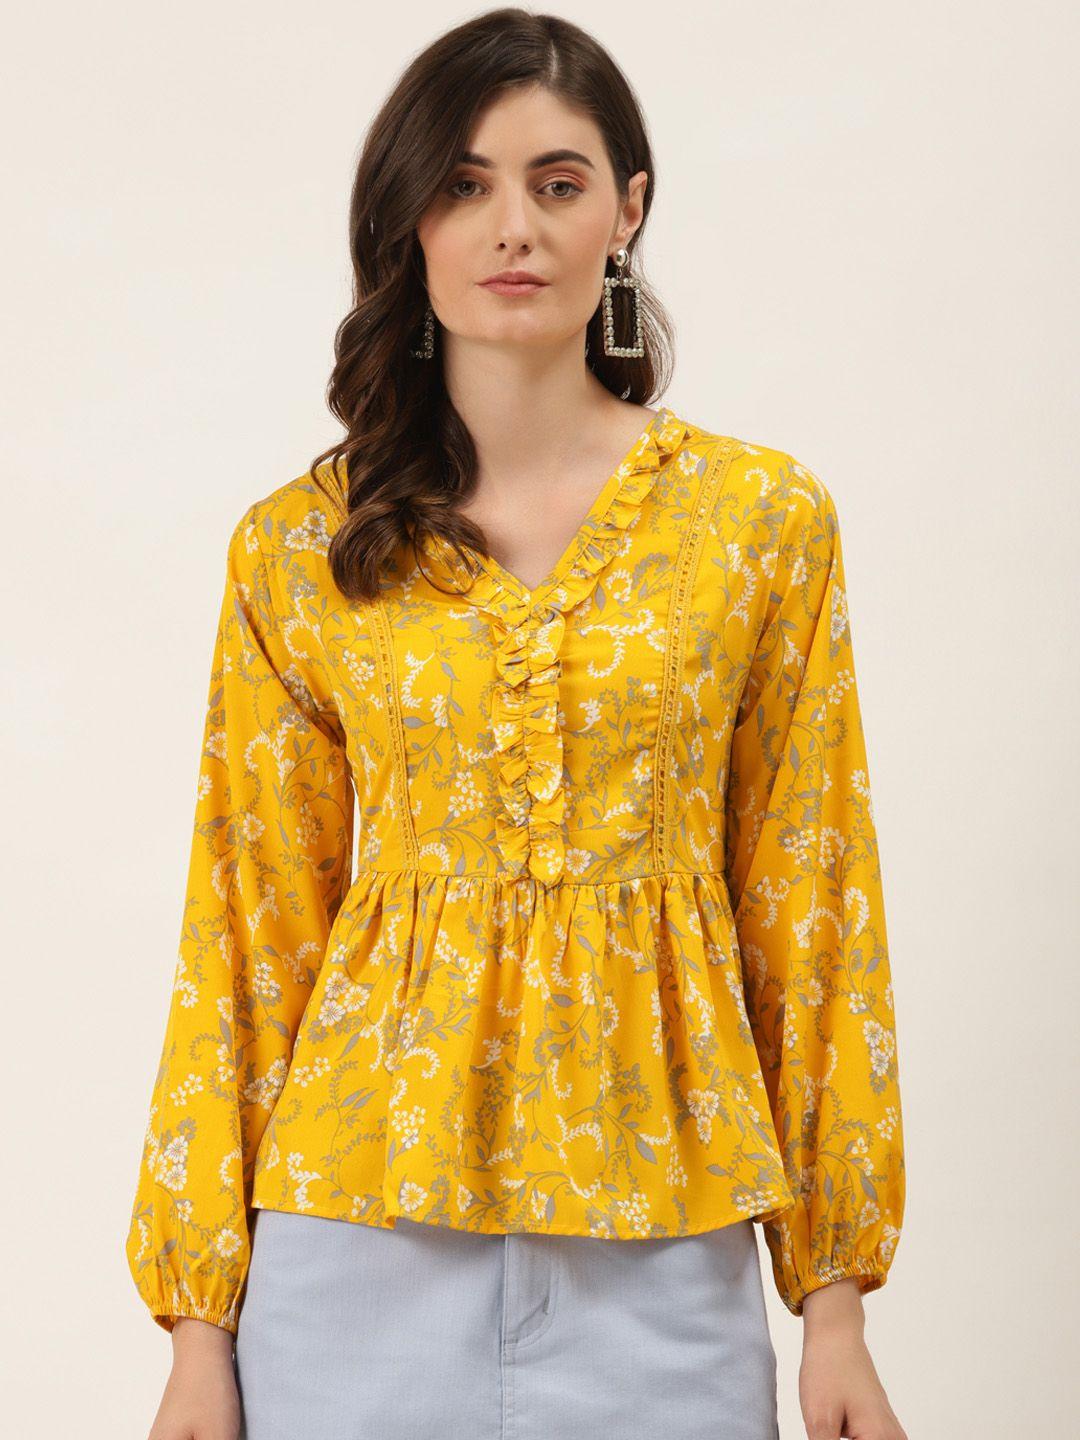 diva walk exclusive mustard yellow & grey floral printed a-line top